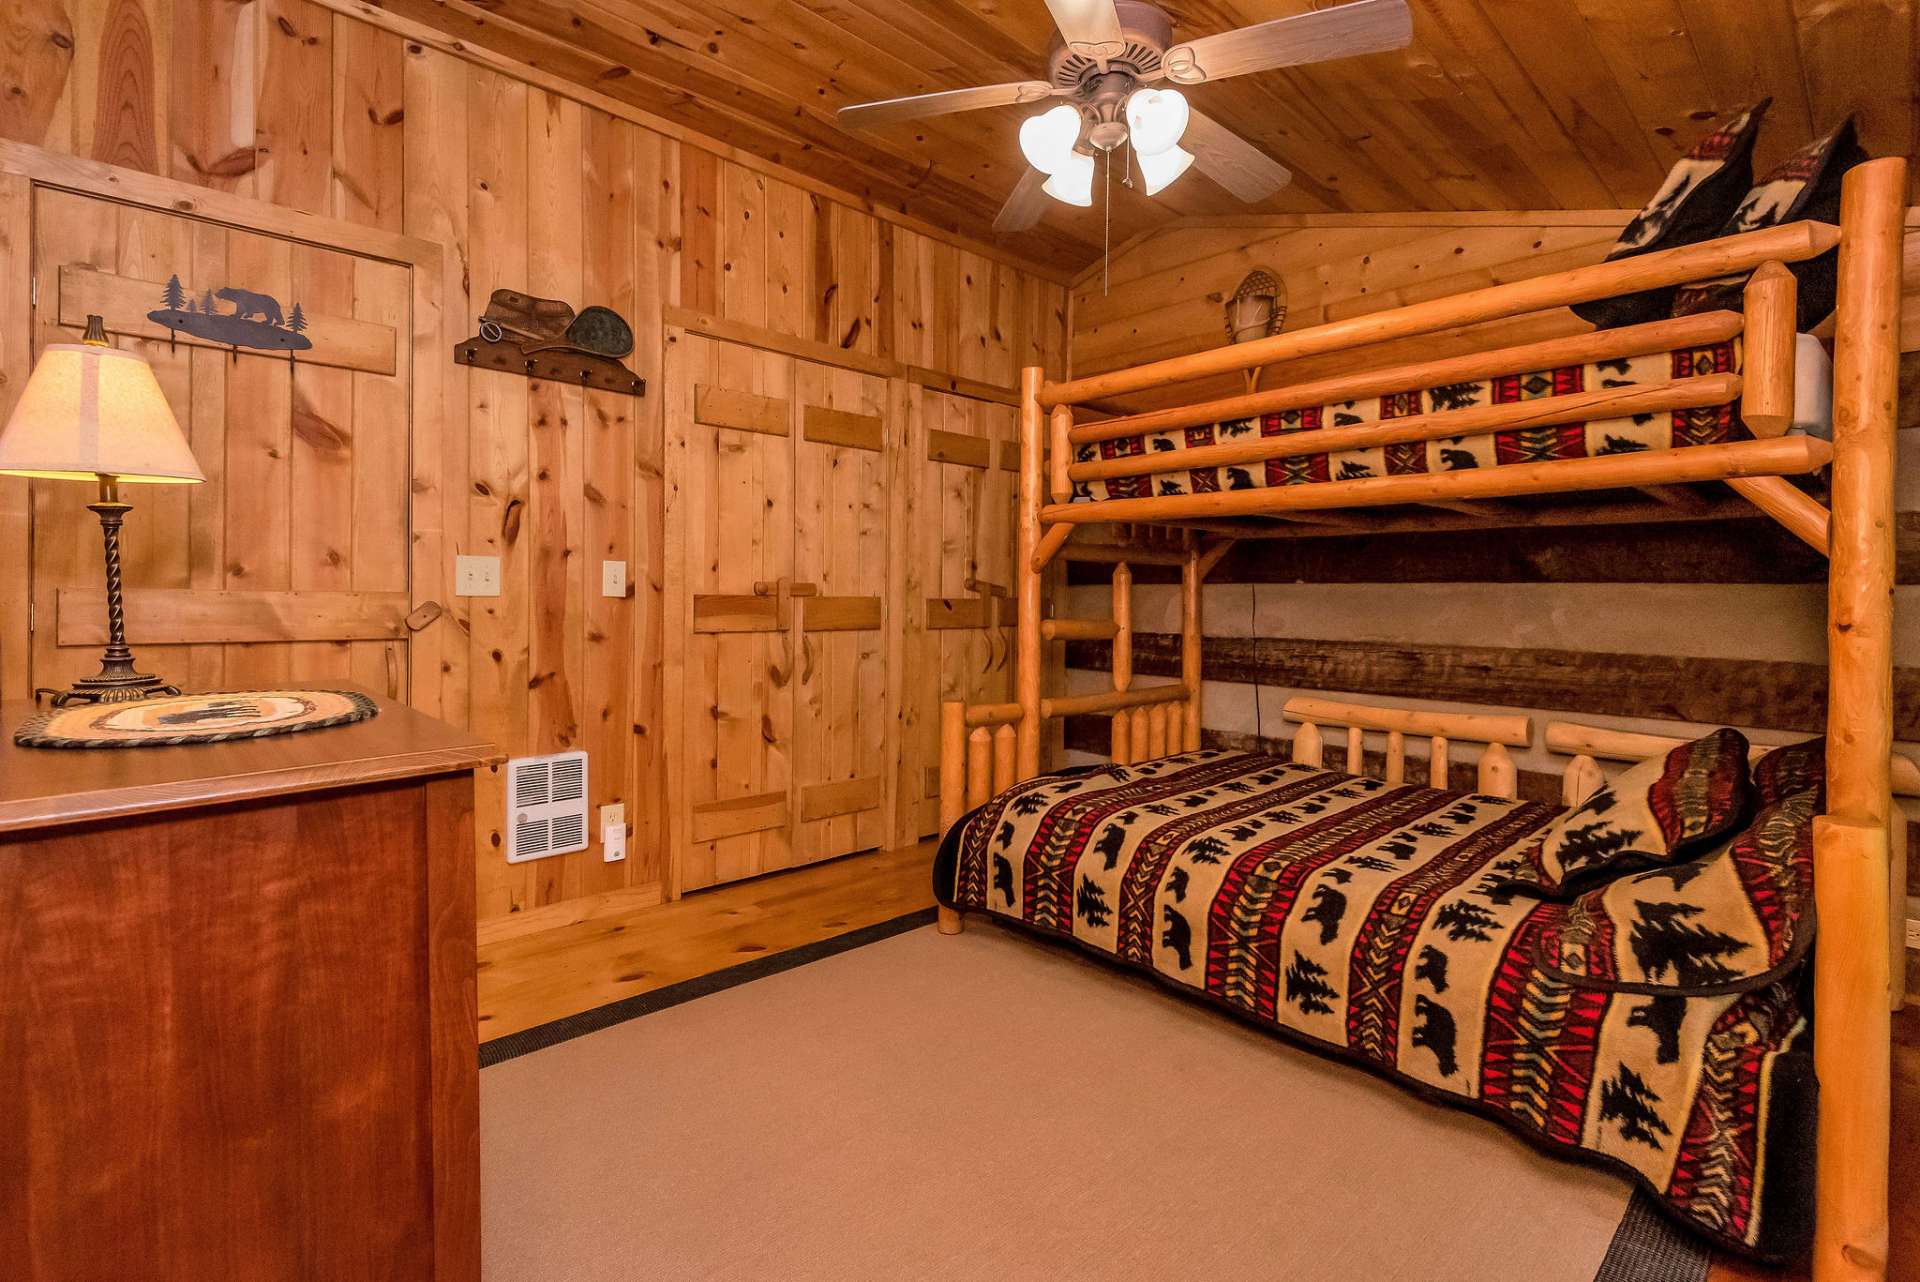 This loft bedroom can accommodate longer stays with a sizable closet and space to unwind.